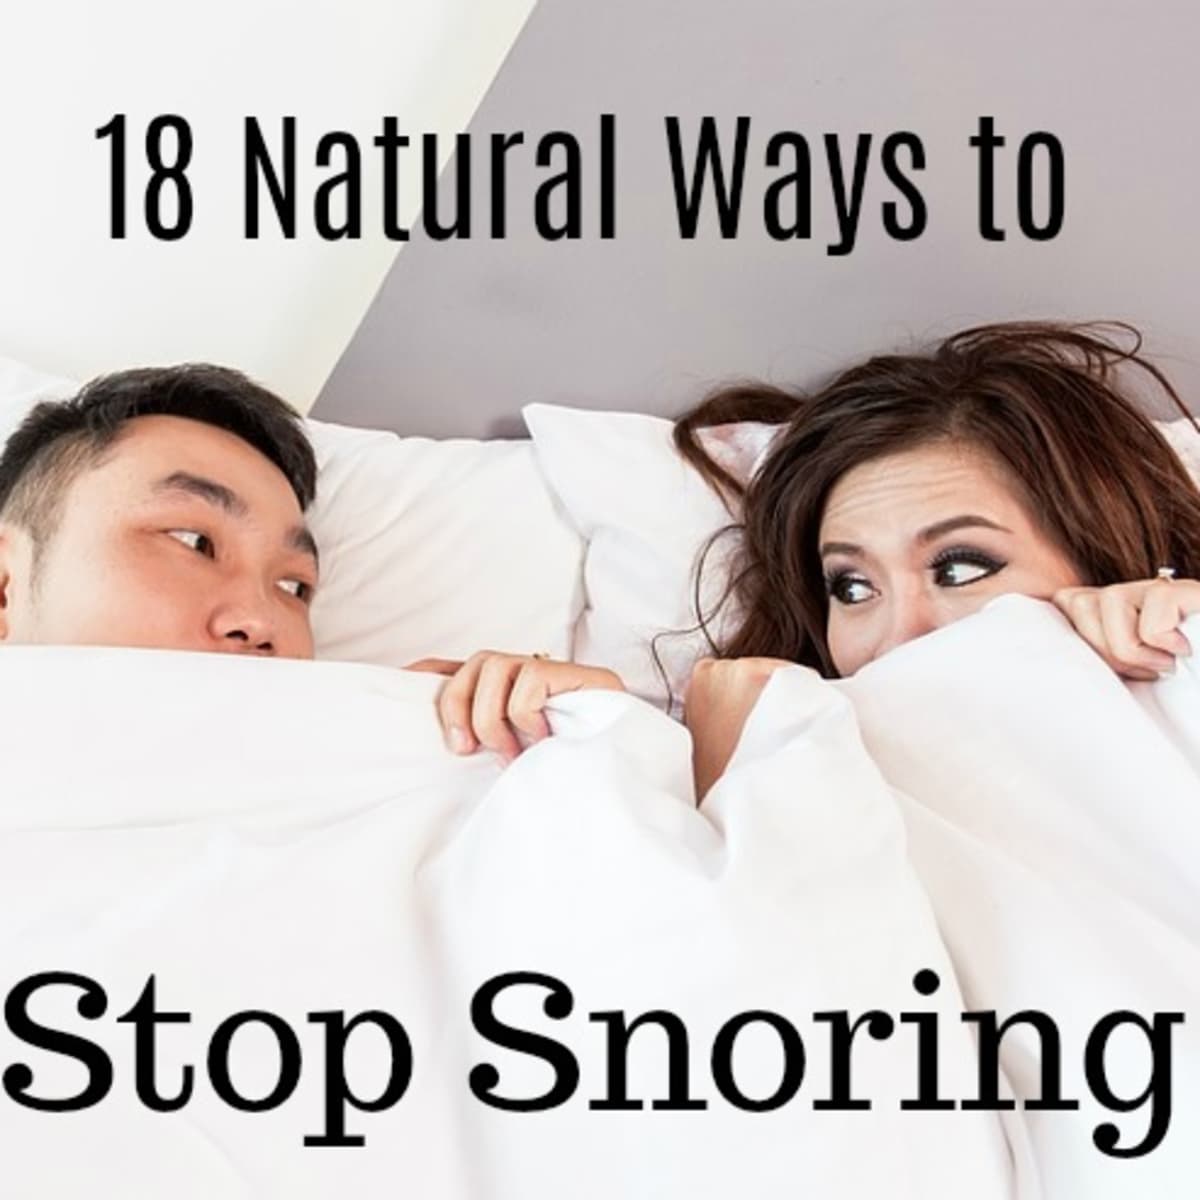 How to stop snoring naturally